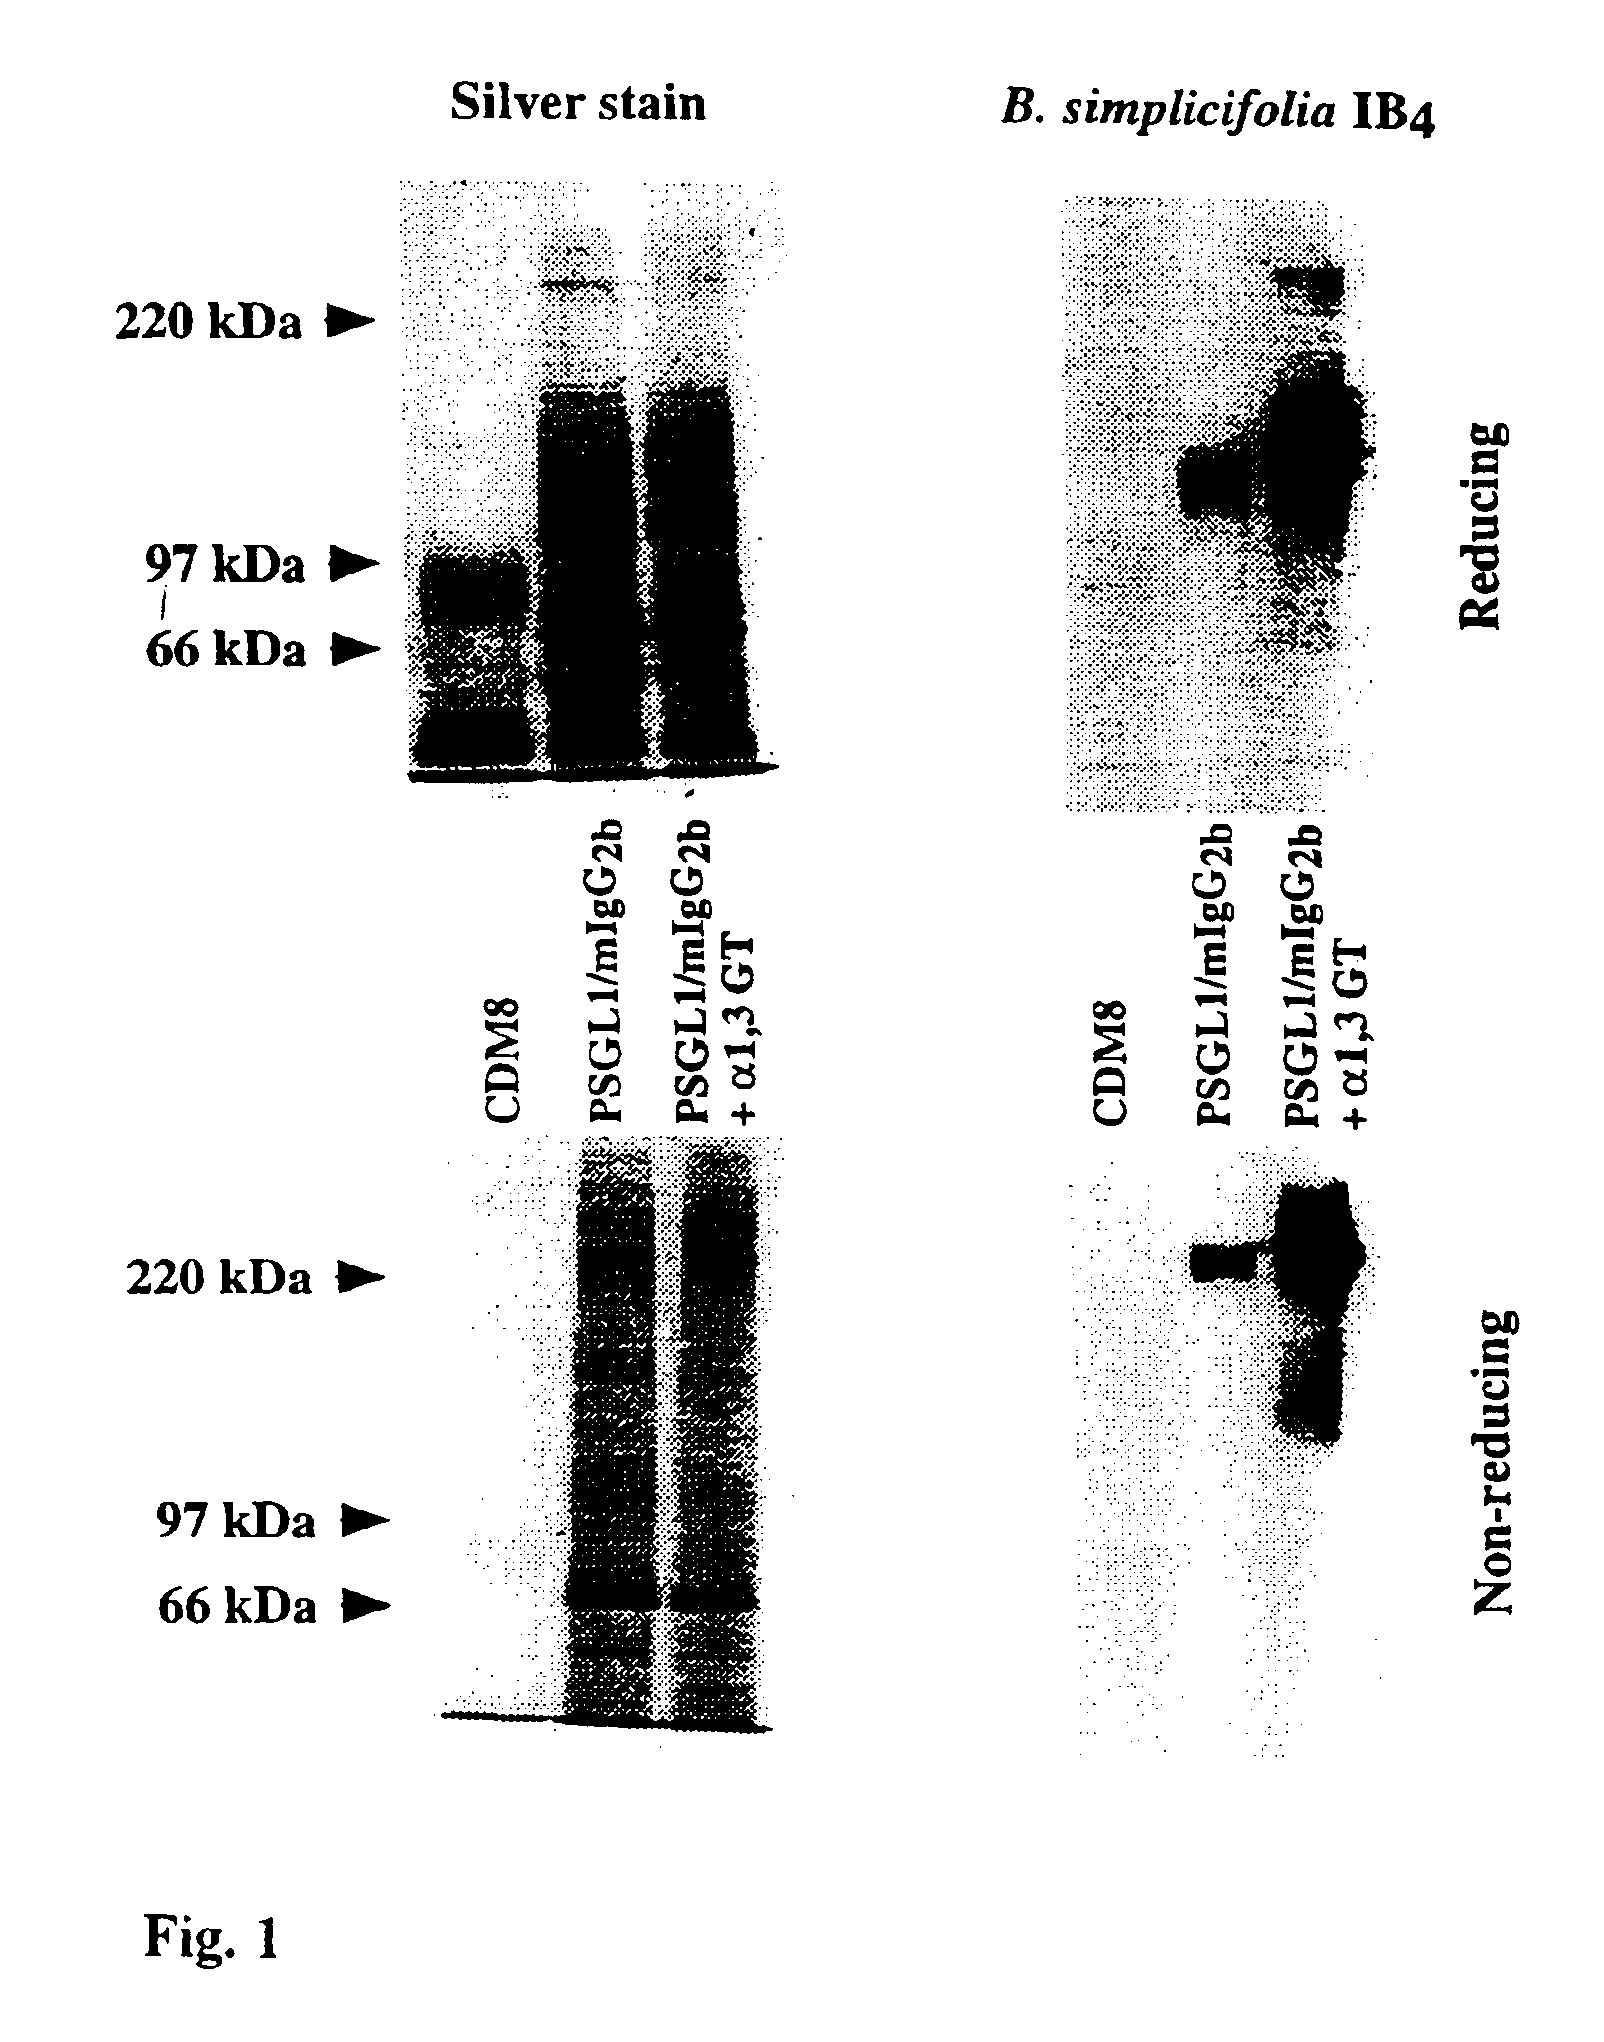 Antigenic fusionprotein carrying Galalpha1,3Gal epitopes